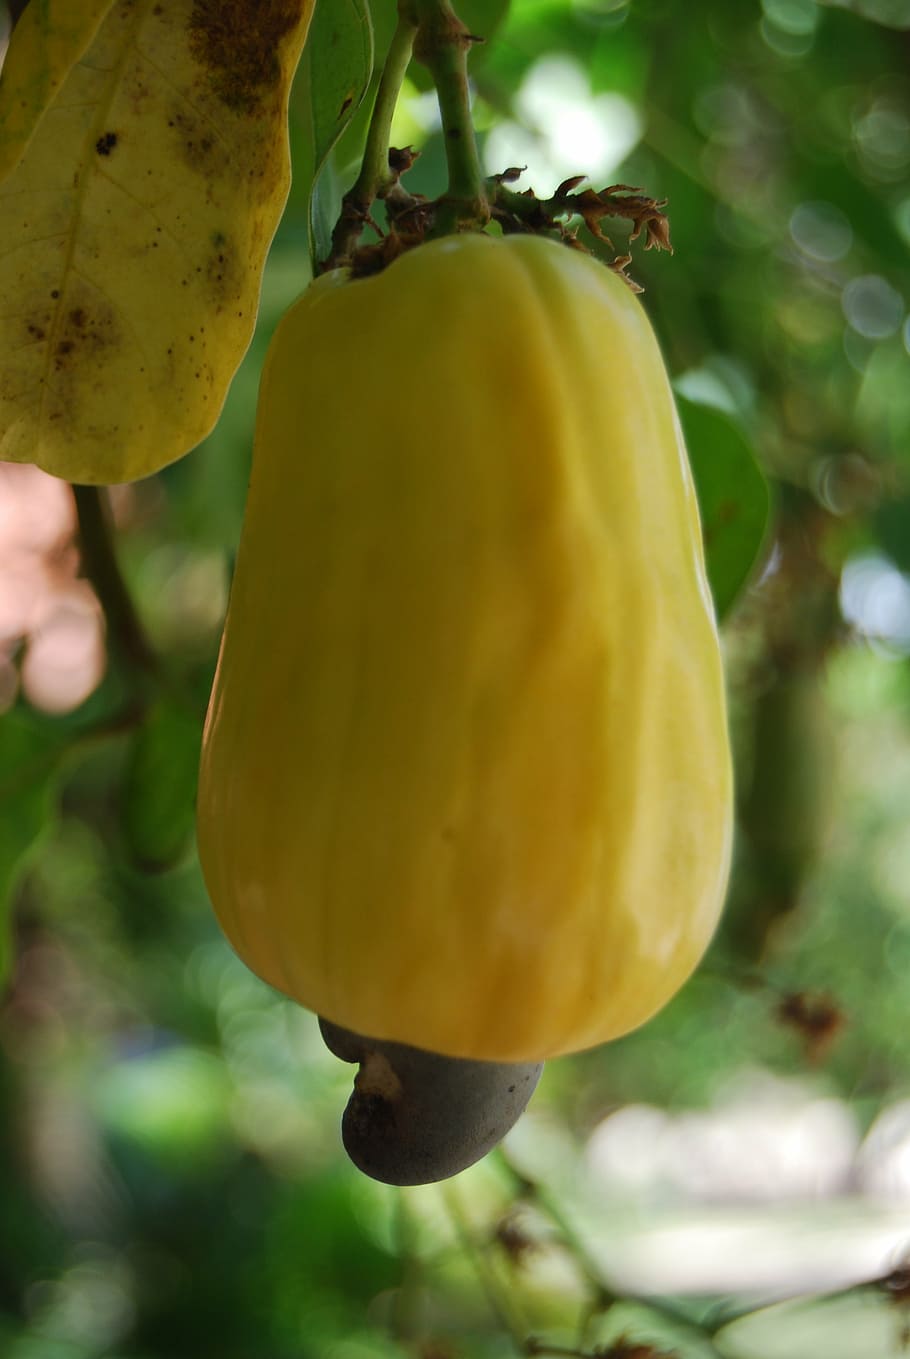 cashew, tropical fruit, fruit, food, nature, vegetable, agriculture, plant, green Color, organic